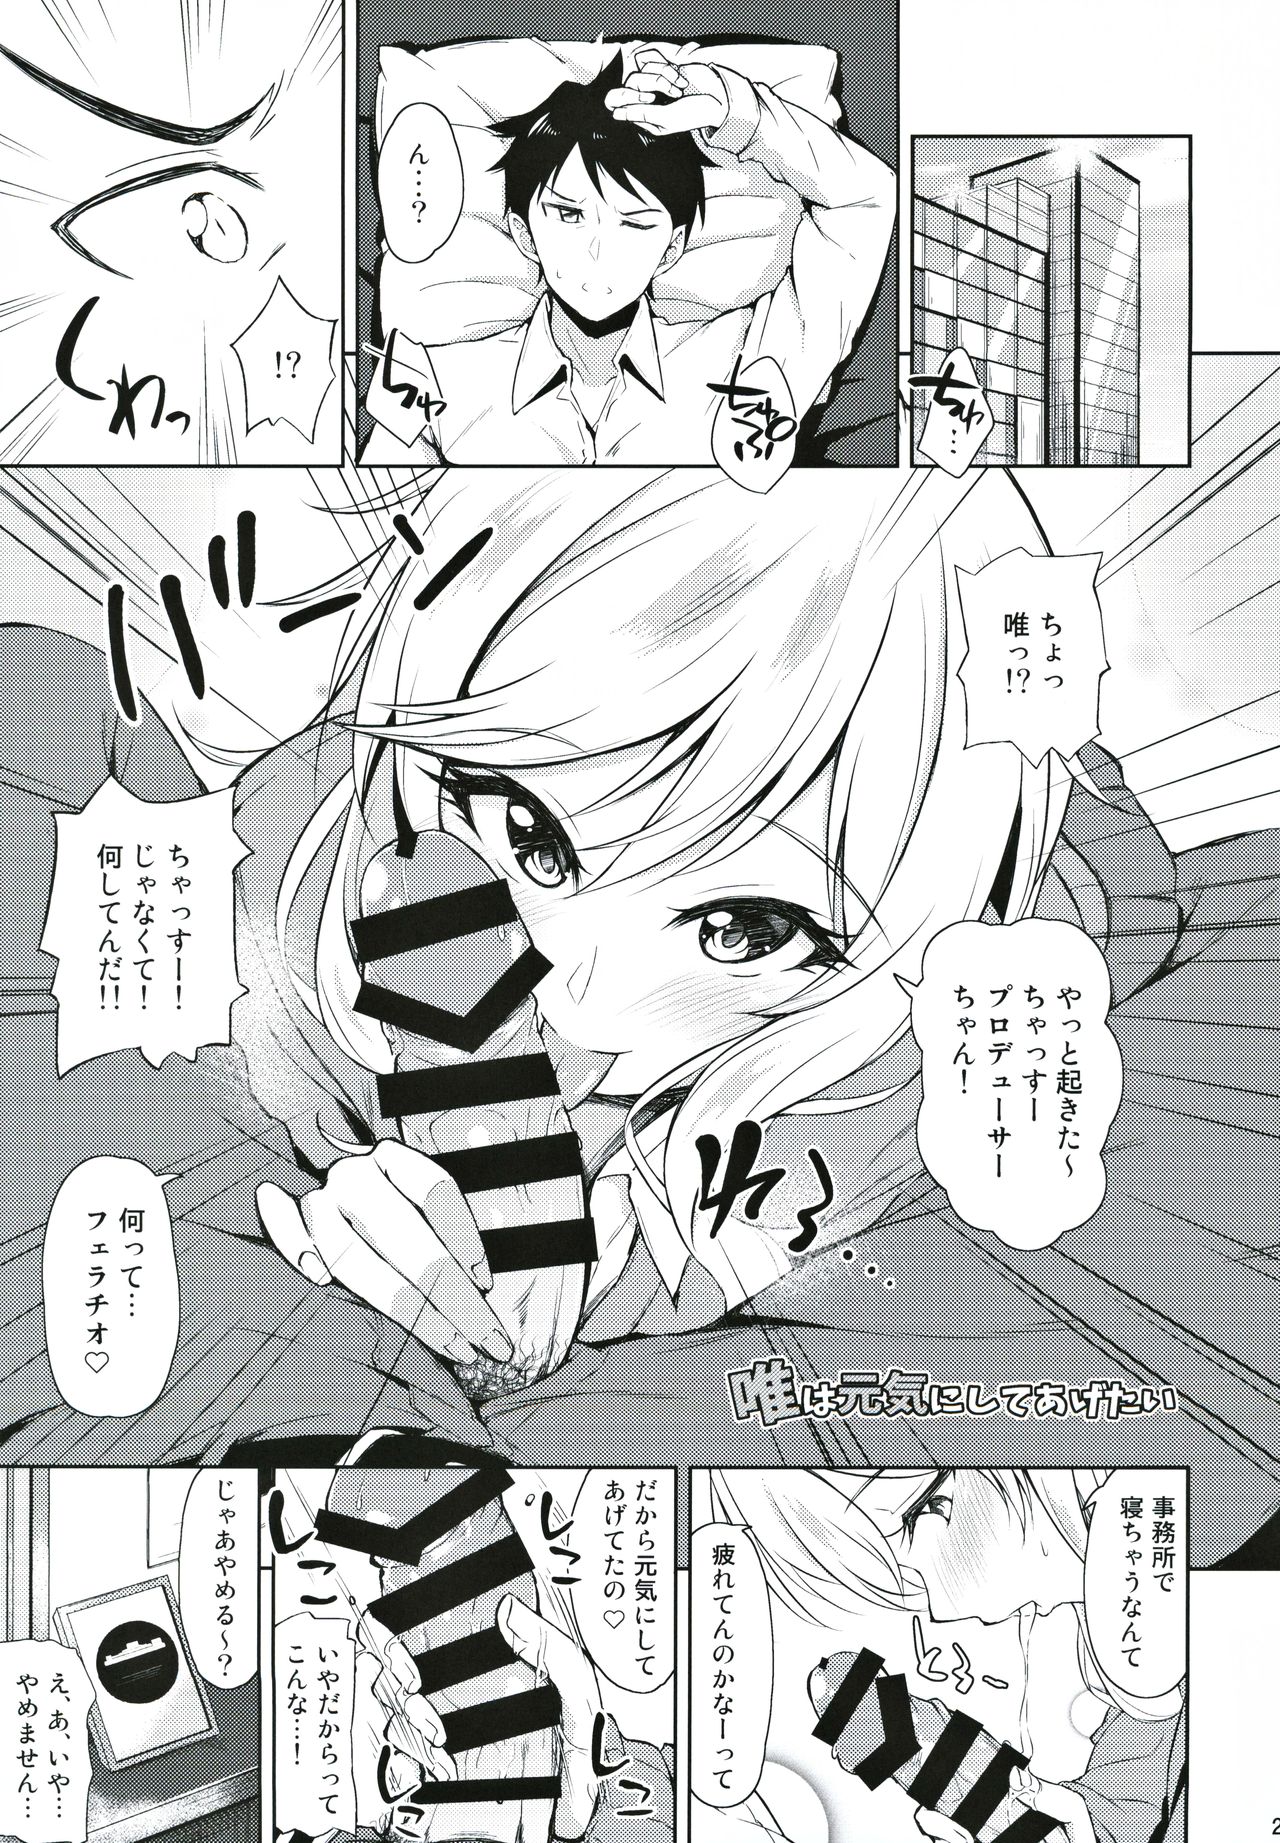 (CiNDERELLA ☆ STAGE 8 STEP) [Prism Store (Jino)] Re: Yui-iro. (THE IDOLM@STER CINDERELLA GIRLS) page 22 full